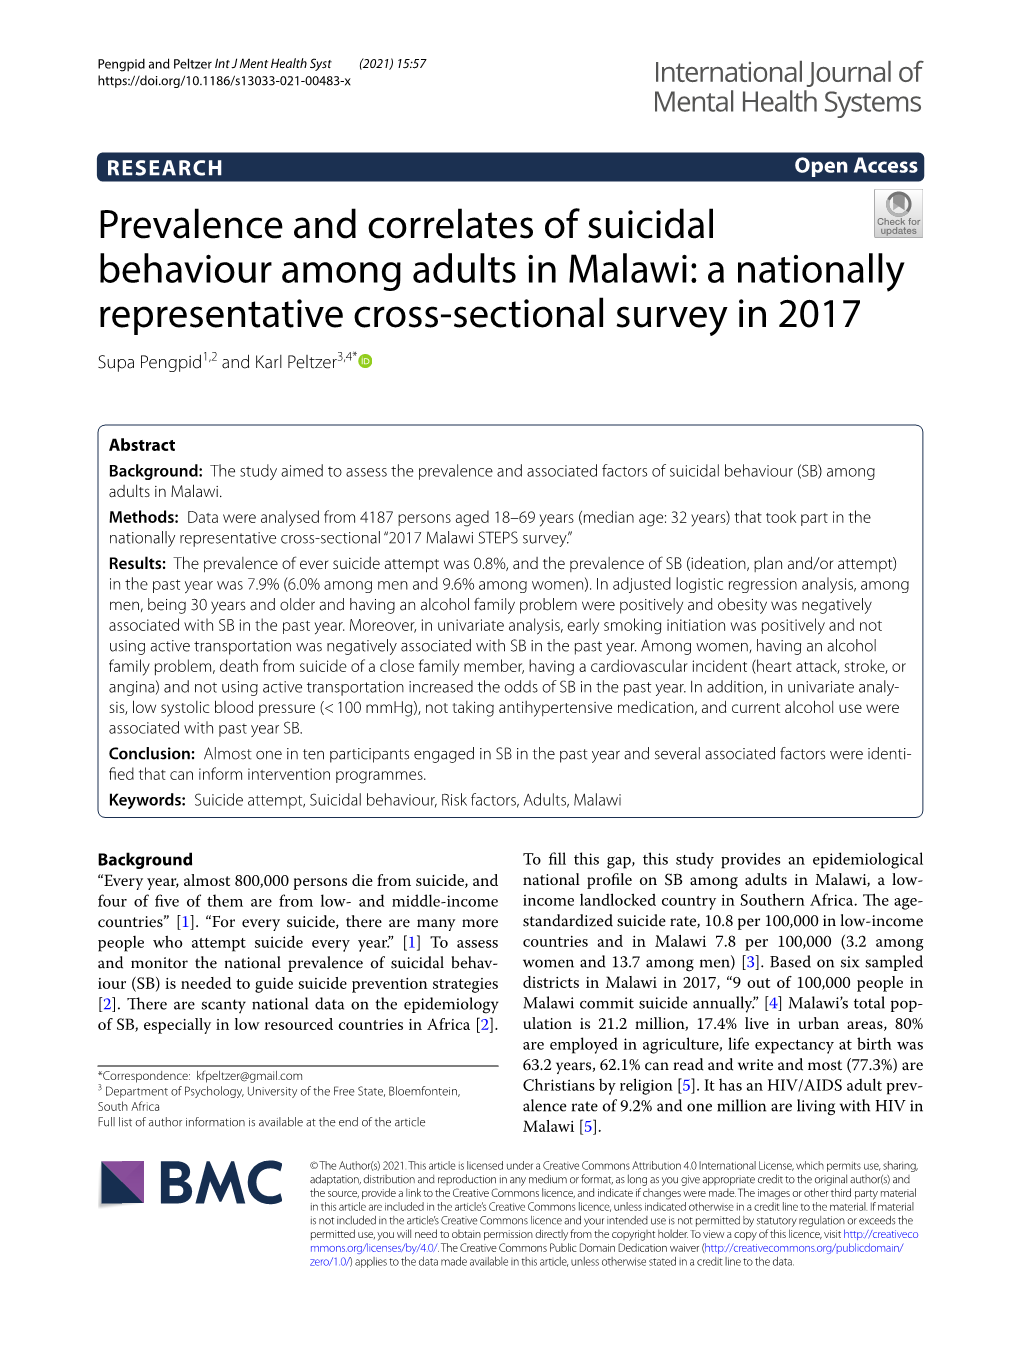 Prevalence and Correlates of Suicidal Behaviour Among Adults in Malawi